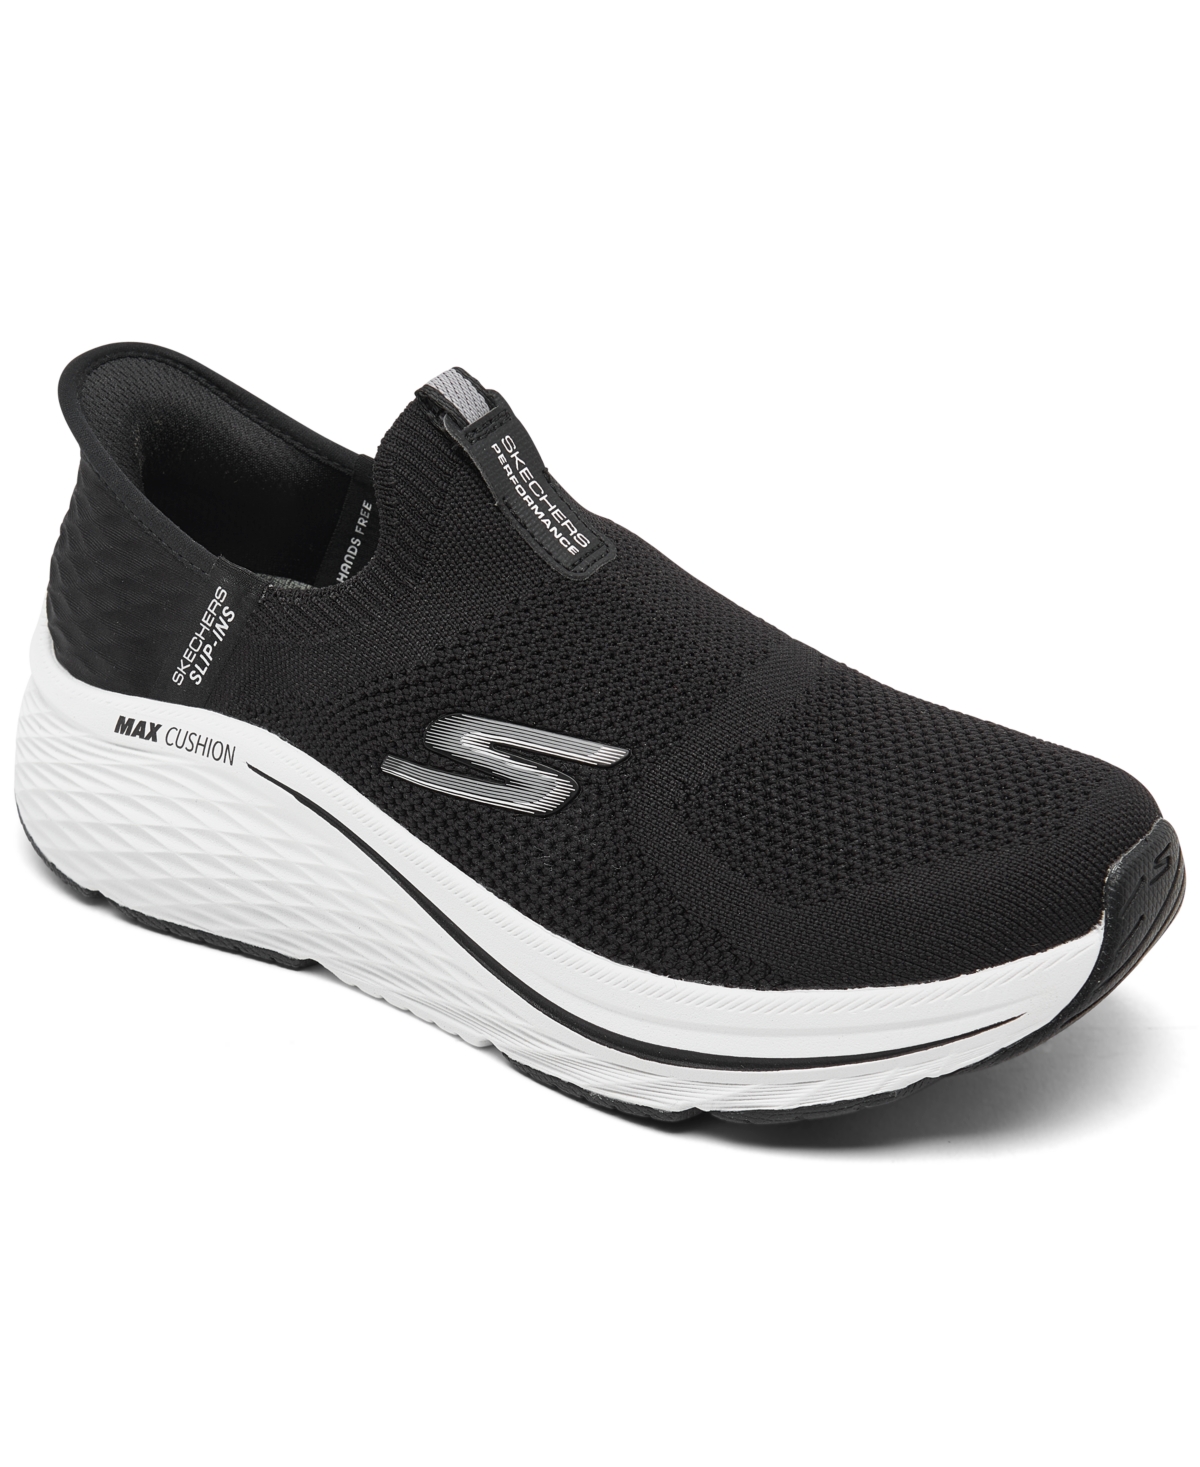 Women's Slip-ins Max Cushioning Elite 2.0 Athletic Running Sneakers from Finish Line - Black, White